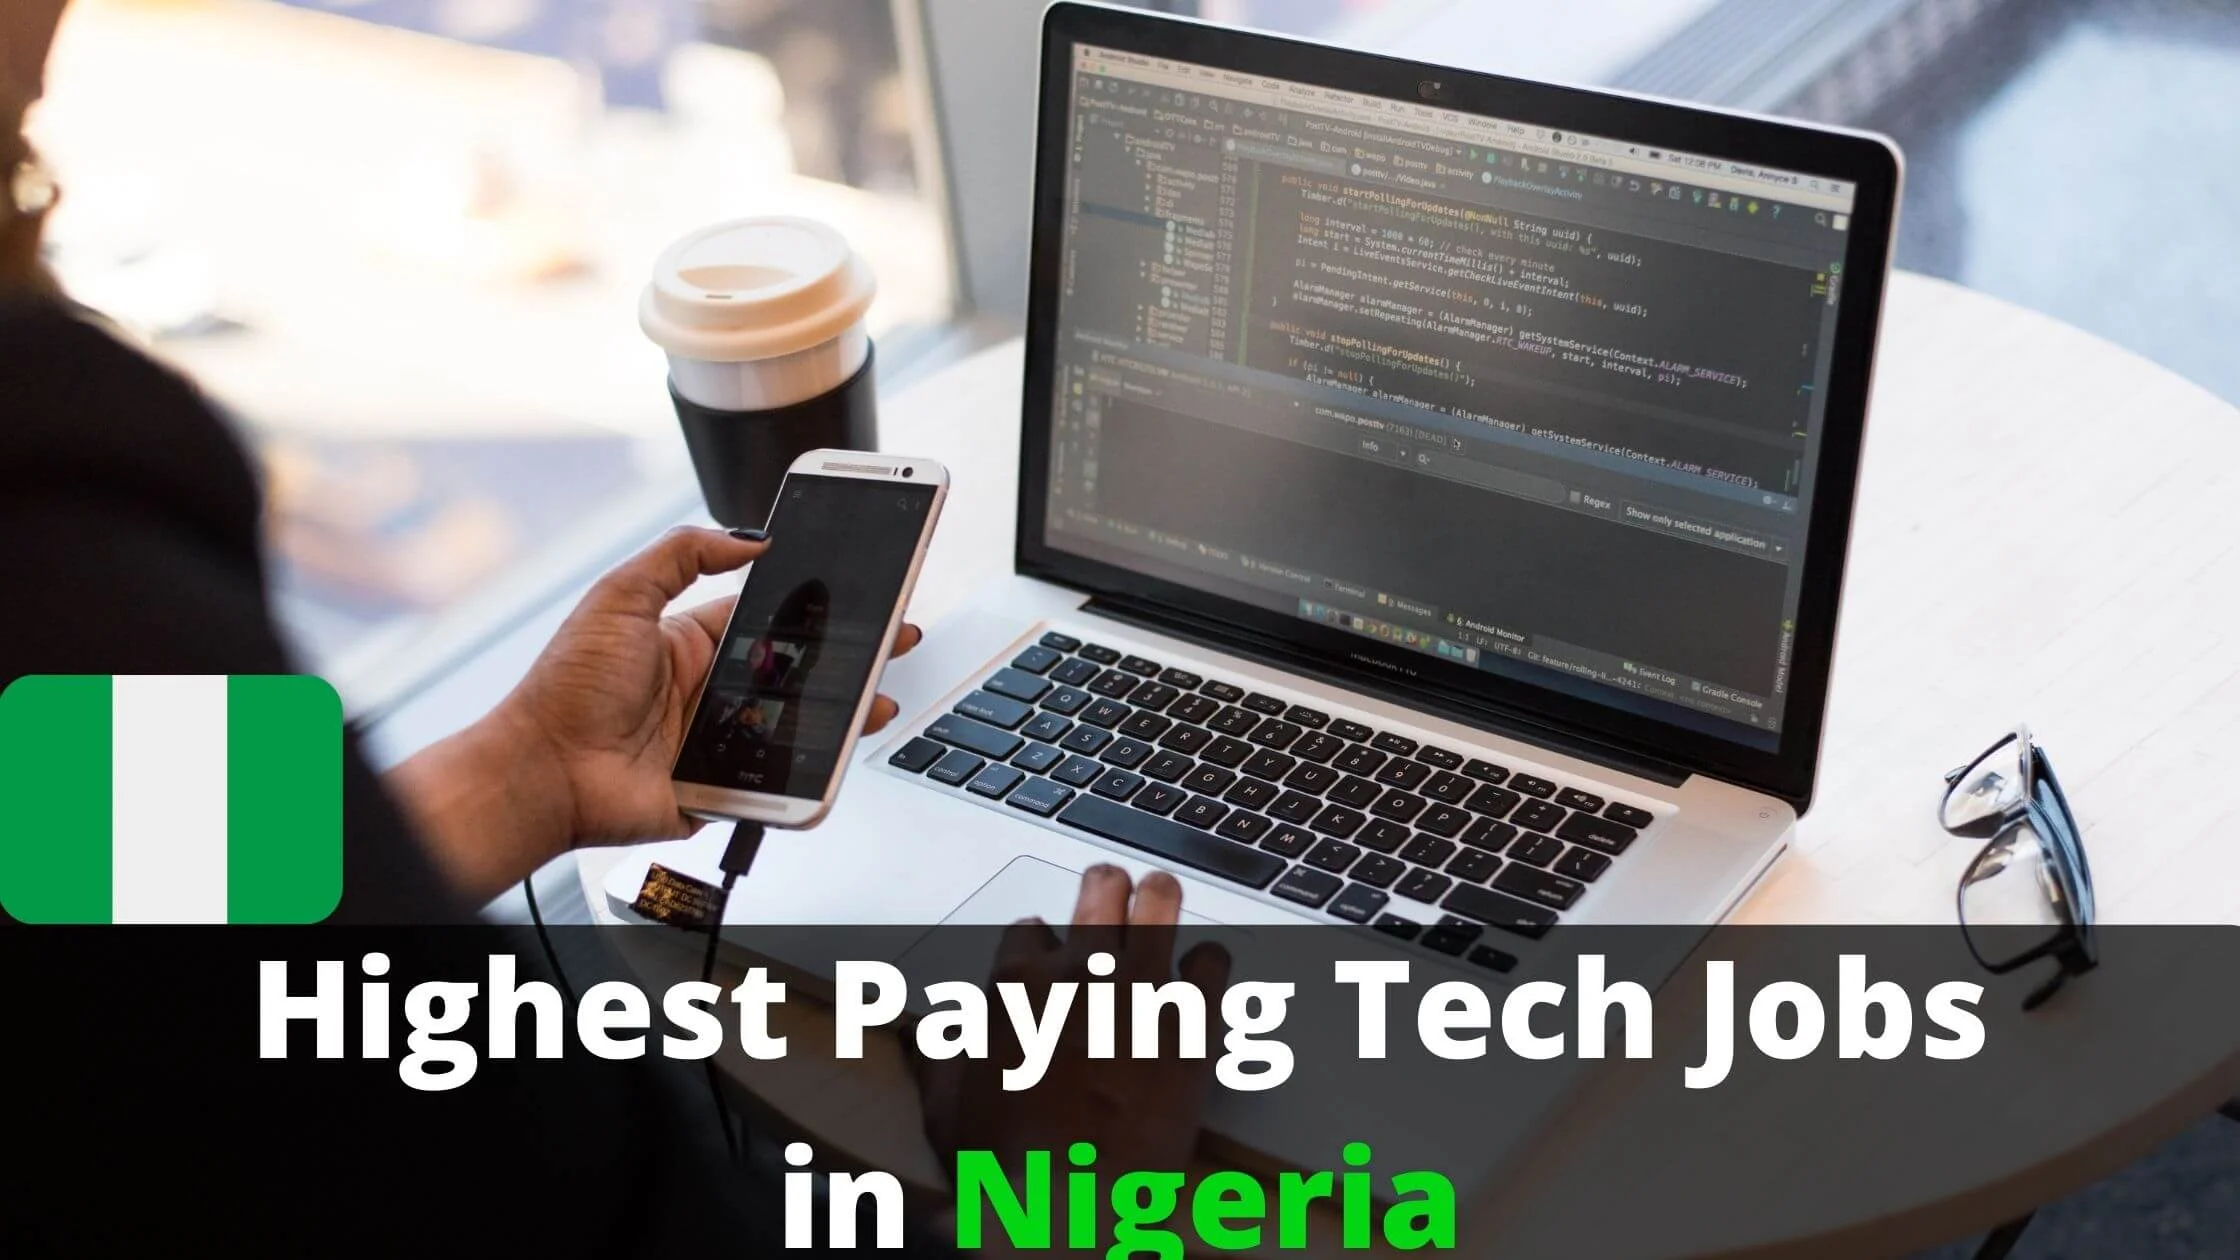 Highest Paying Tech Jobs in Nigeria